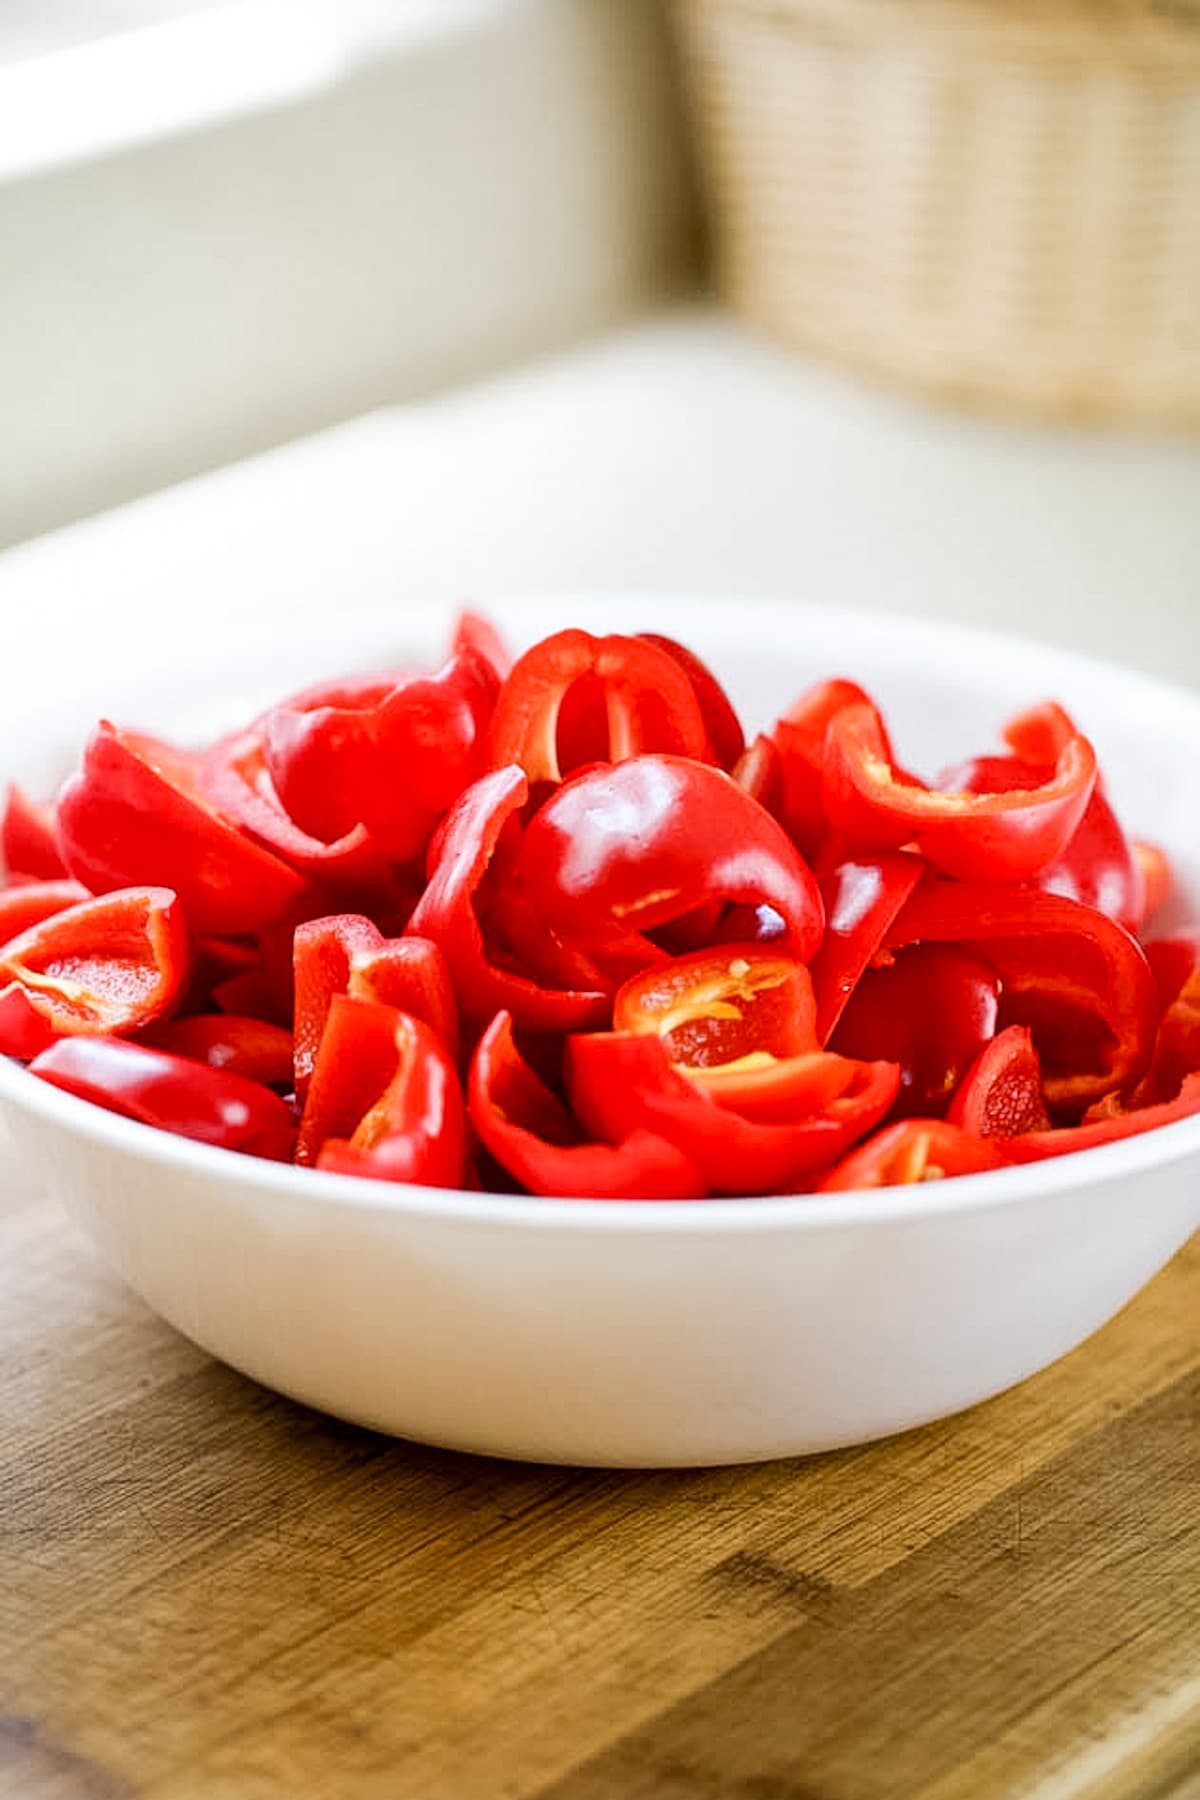 cut and cleaned red bell peppers